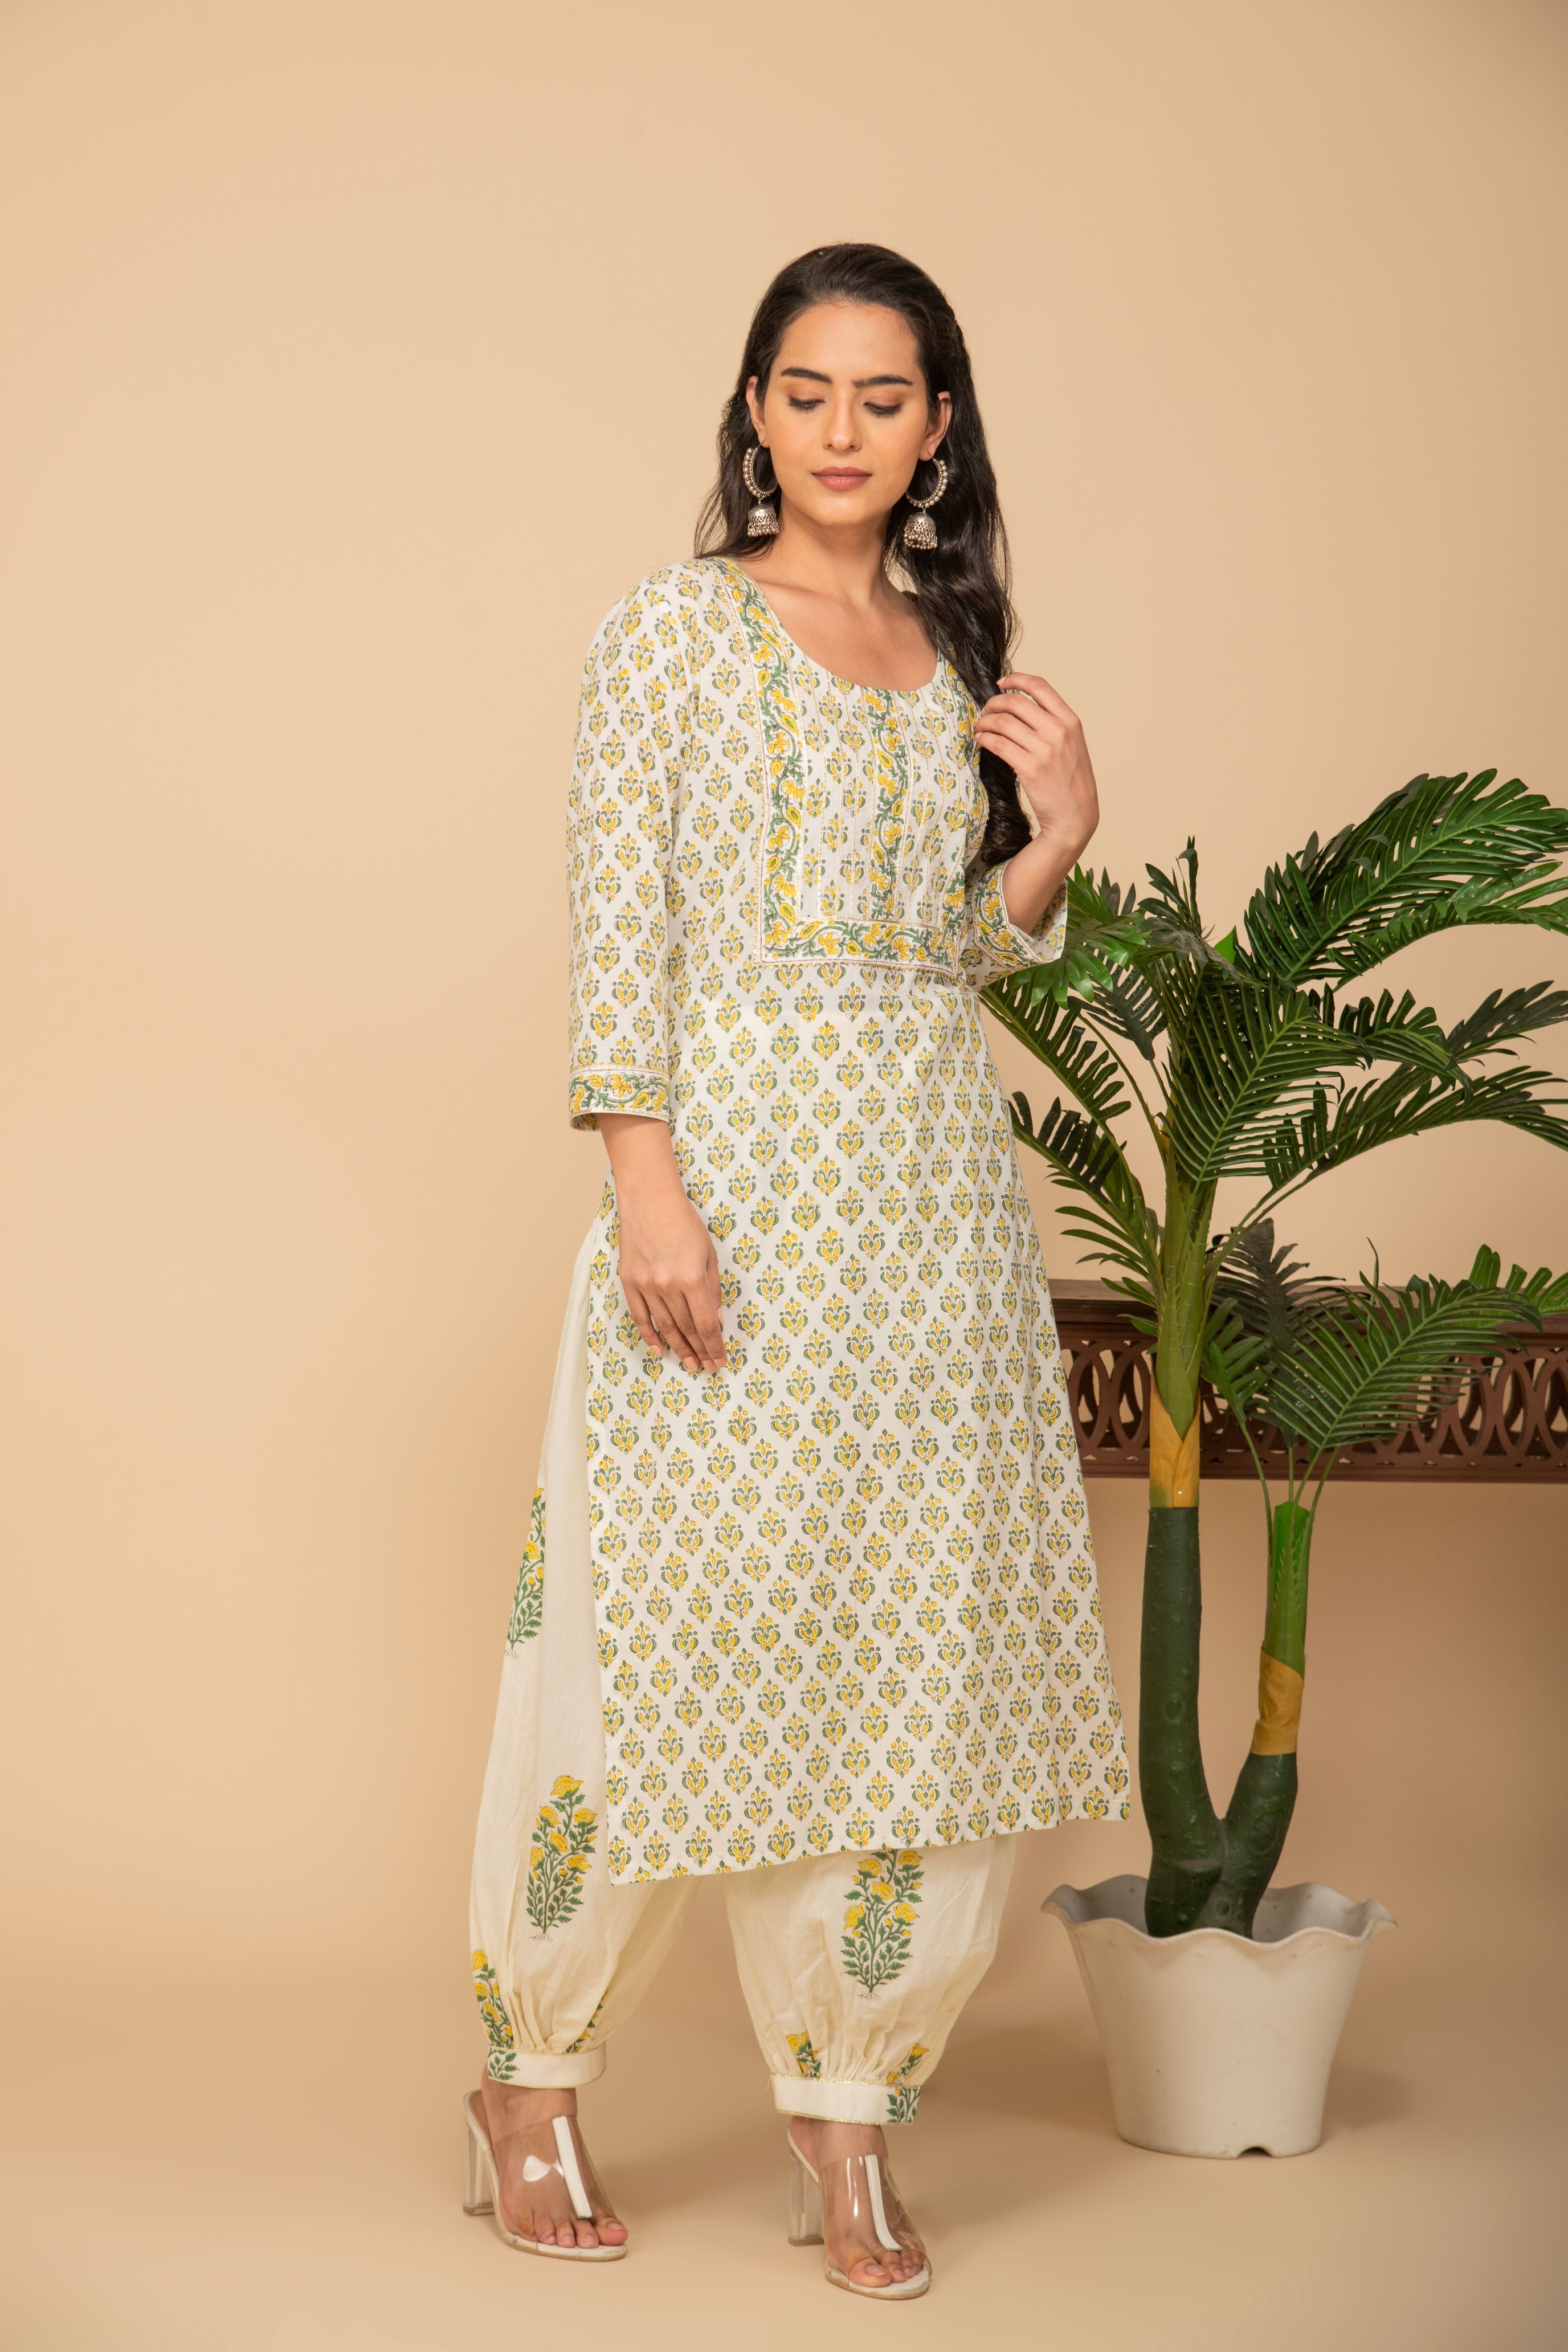 White buttis printed kurta with white/mustard printed bottom 3 piece suit set with contrasting mustard printed scallops all over dupatta.